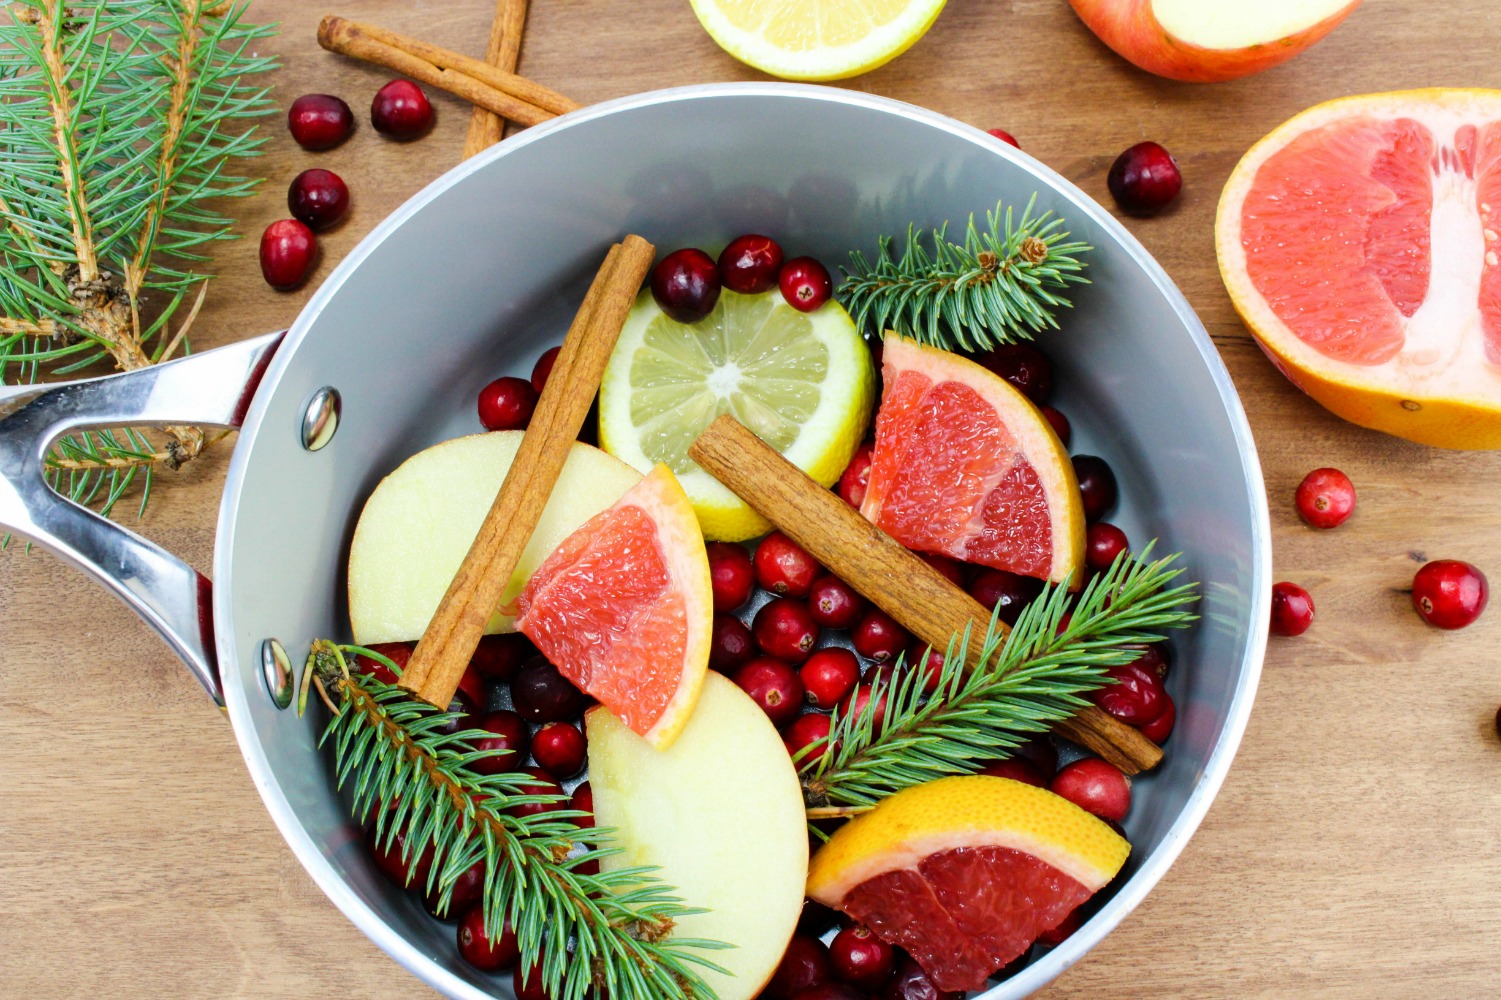 Stovetop Christmas Potpourri, Stovetop Winter Potpourri, This DIY Potpourri is perfect for the Holidays and smells amazing, easy to make Potpourri Recipe, Christmas potpourri stovetop, Christmas potpourri recipe